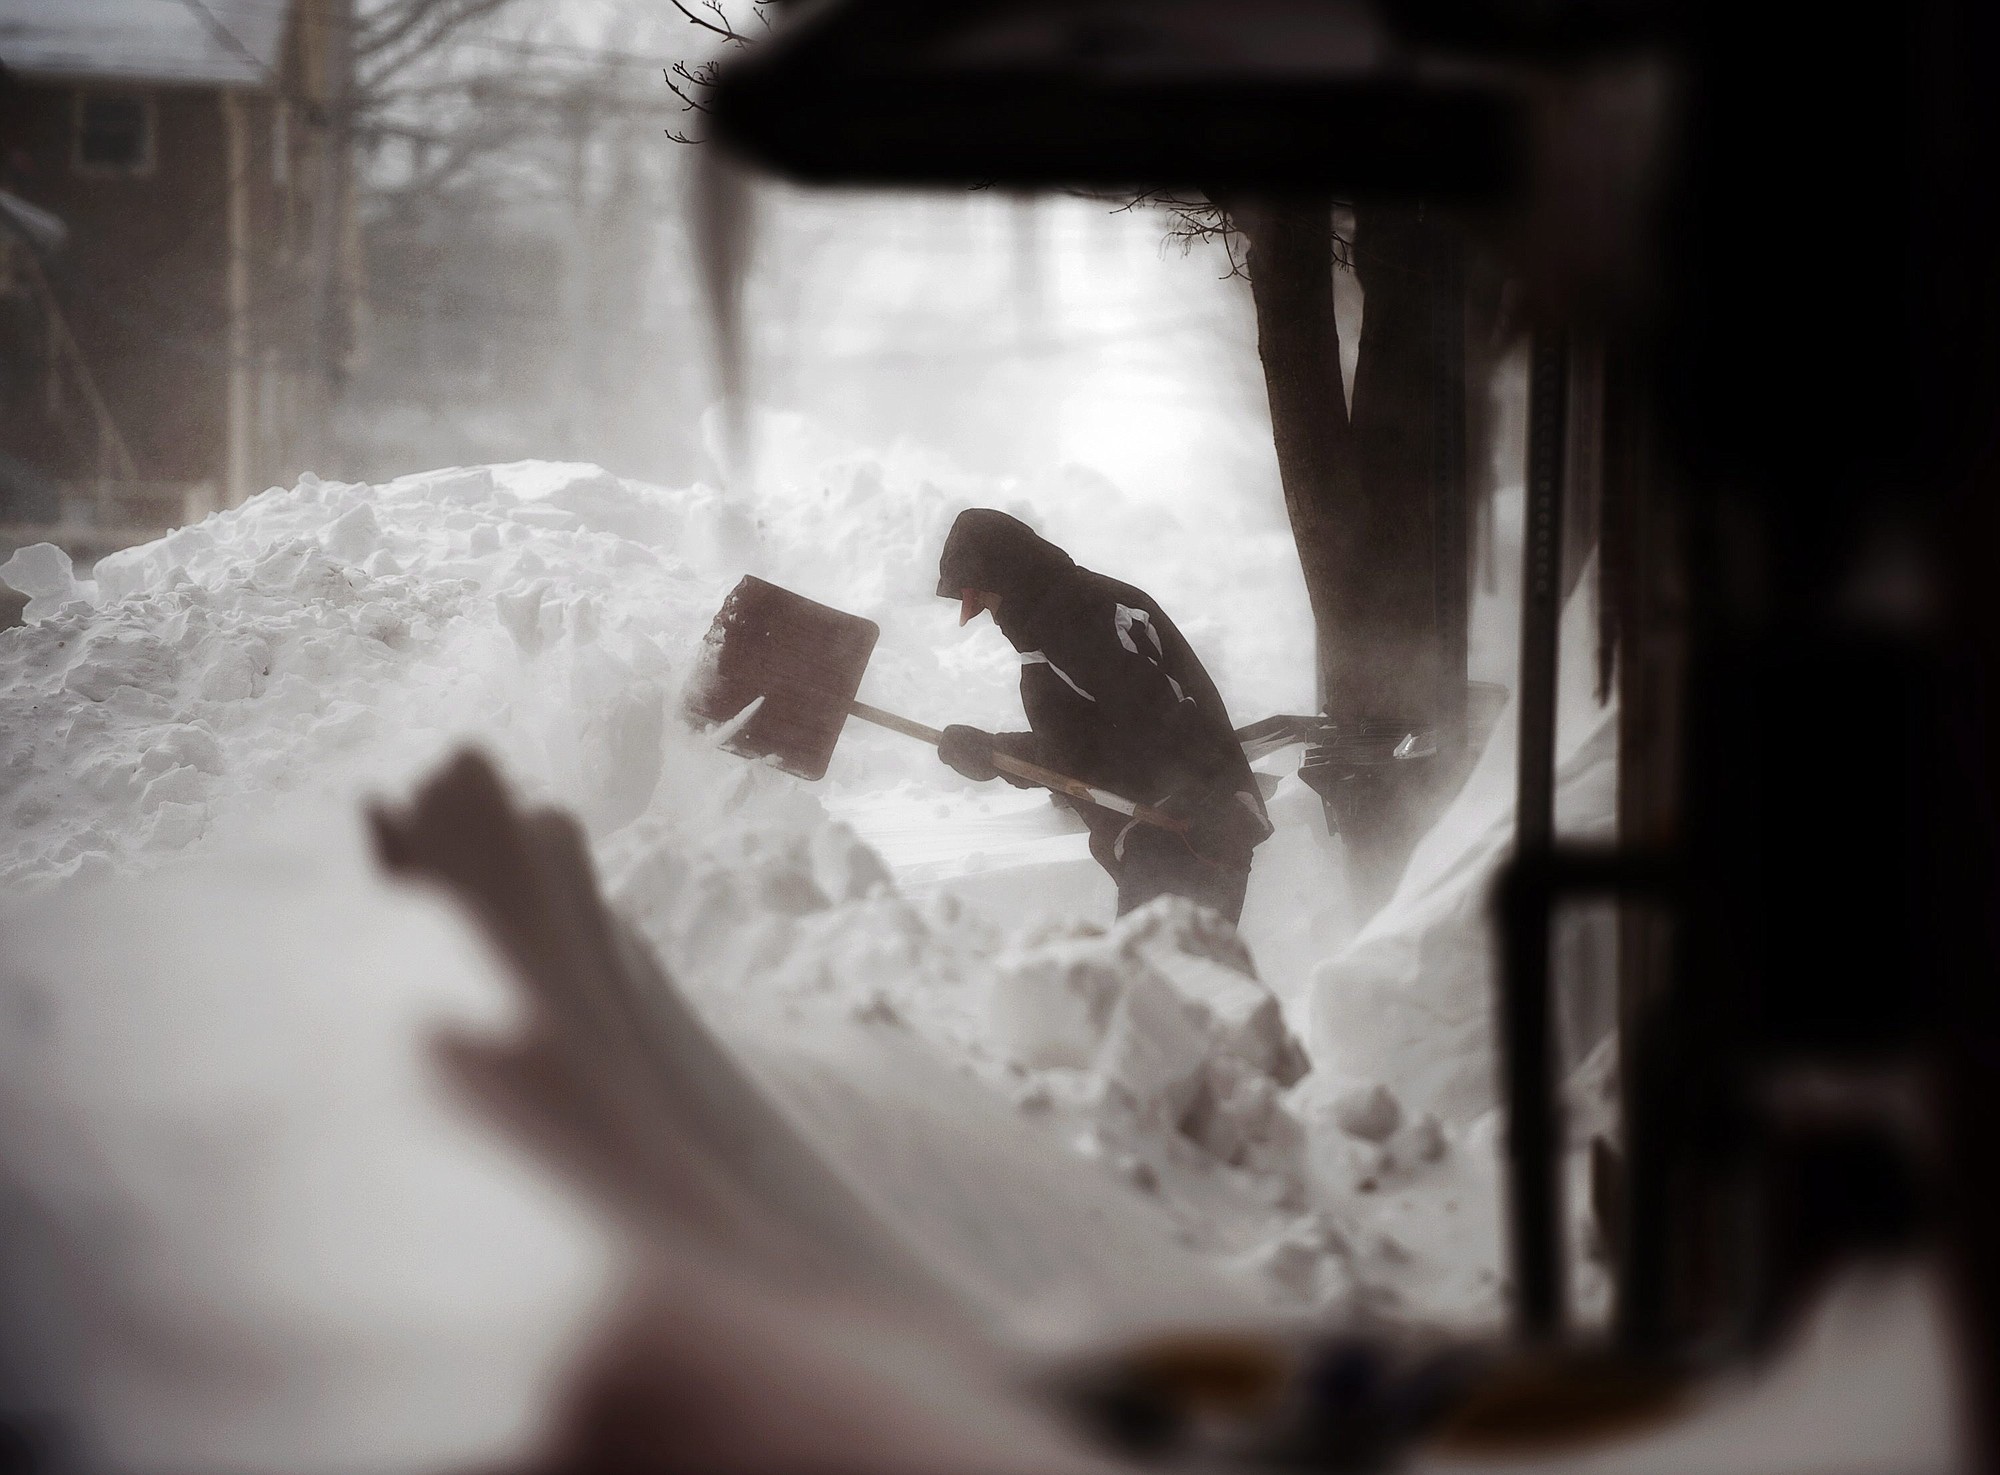 A man clears a sidewalk in downtown Charlottetown, Prince Edward Island, on Monday.